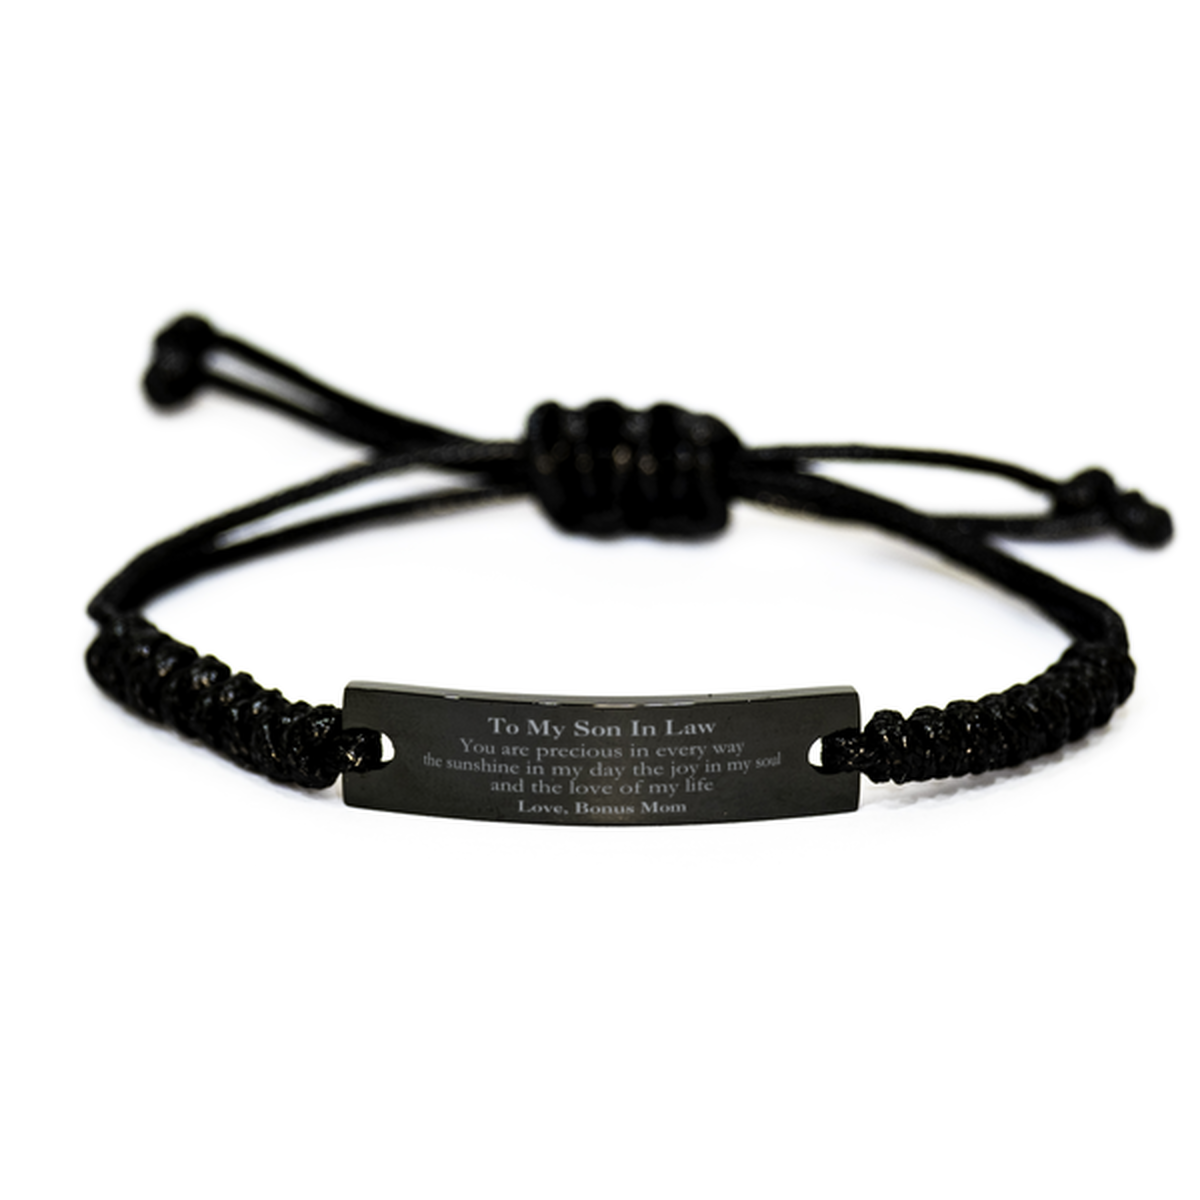 Graduation Gifts for Son In Law Black Rope Bracelet Present from Bonus Mom, Christmas Son In Law Birthday Gifts Son In Law You are precious in every way the sunshine in my day. Love, Bonus Mom